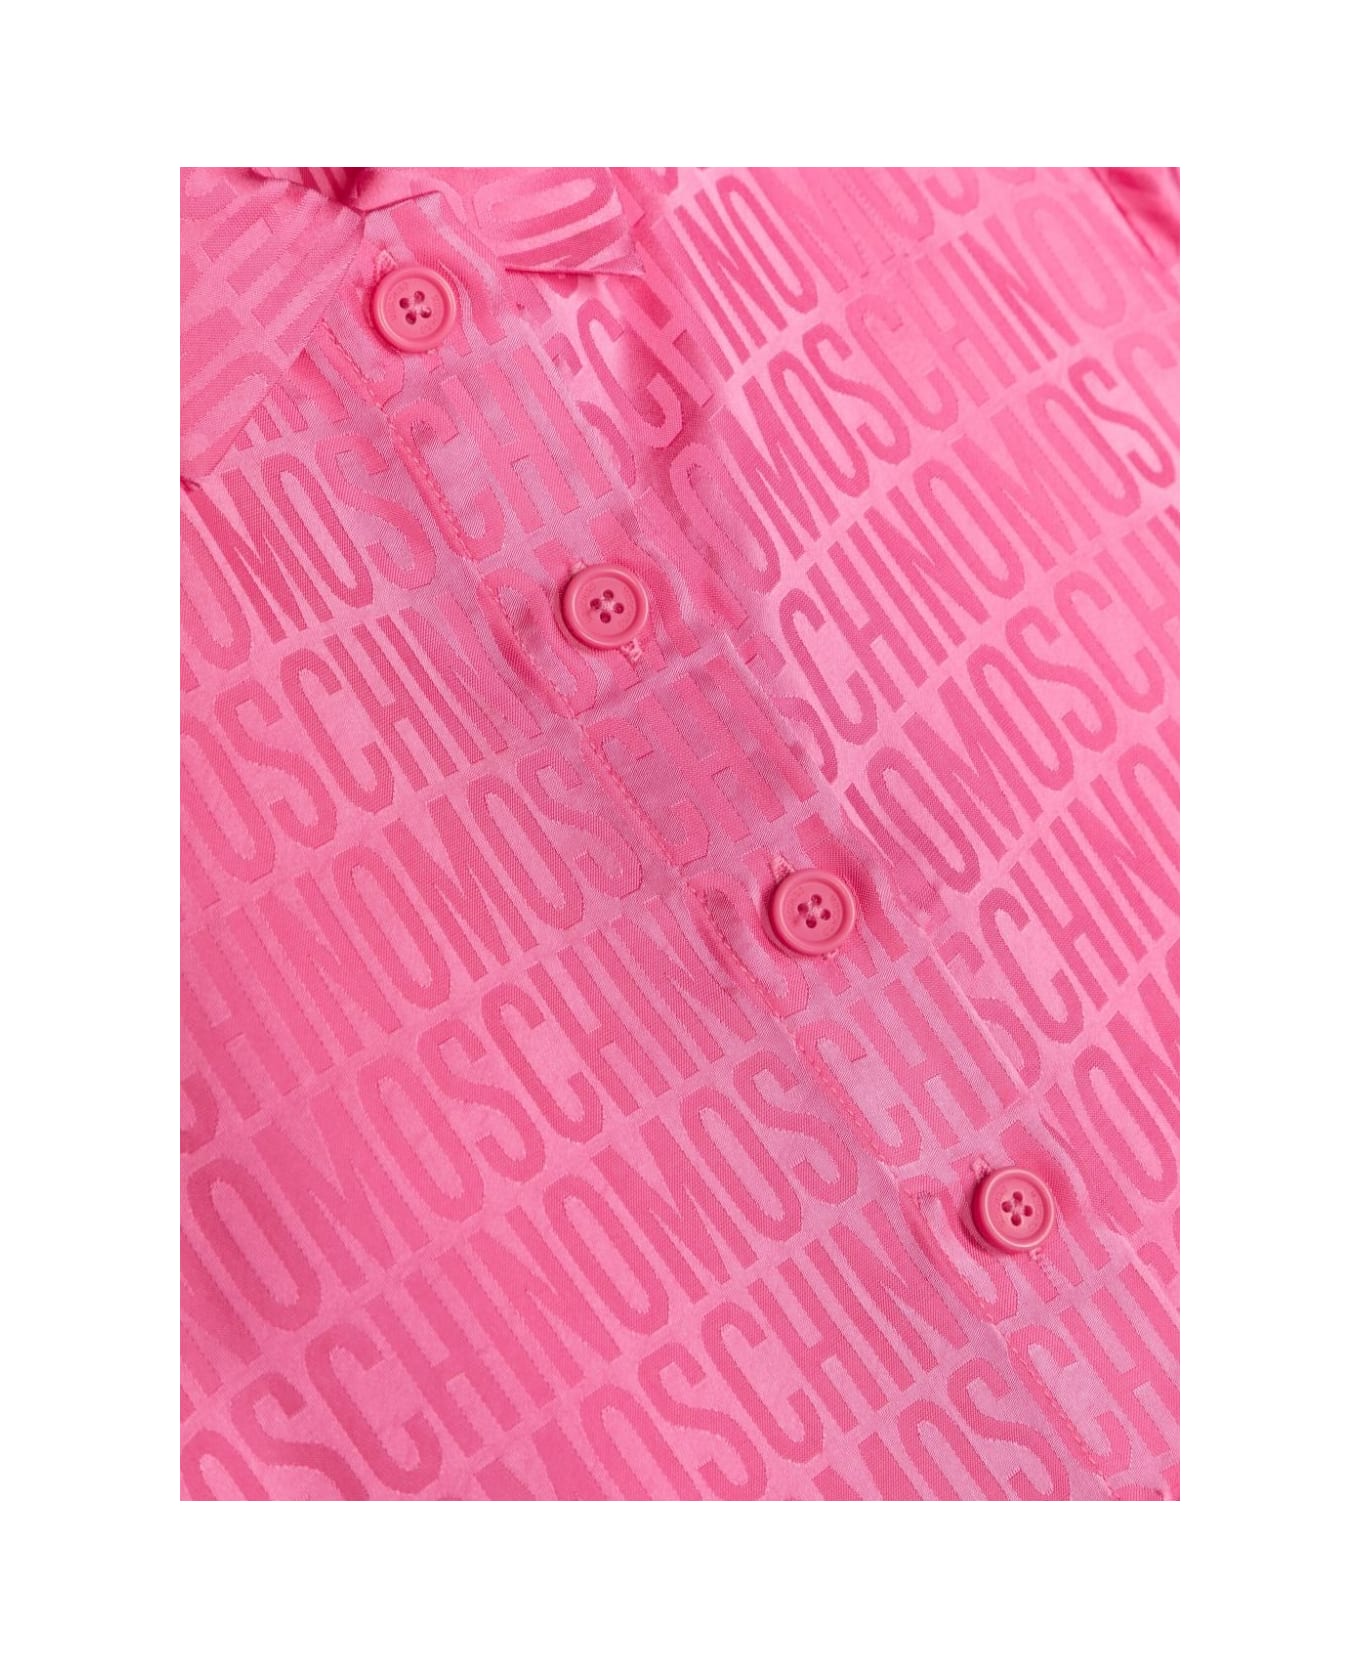 Moschino Pink Shirt With All-over Jacquard Logo - Pink